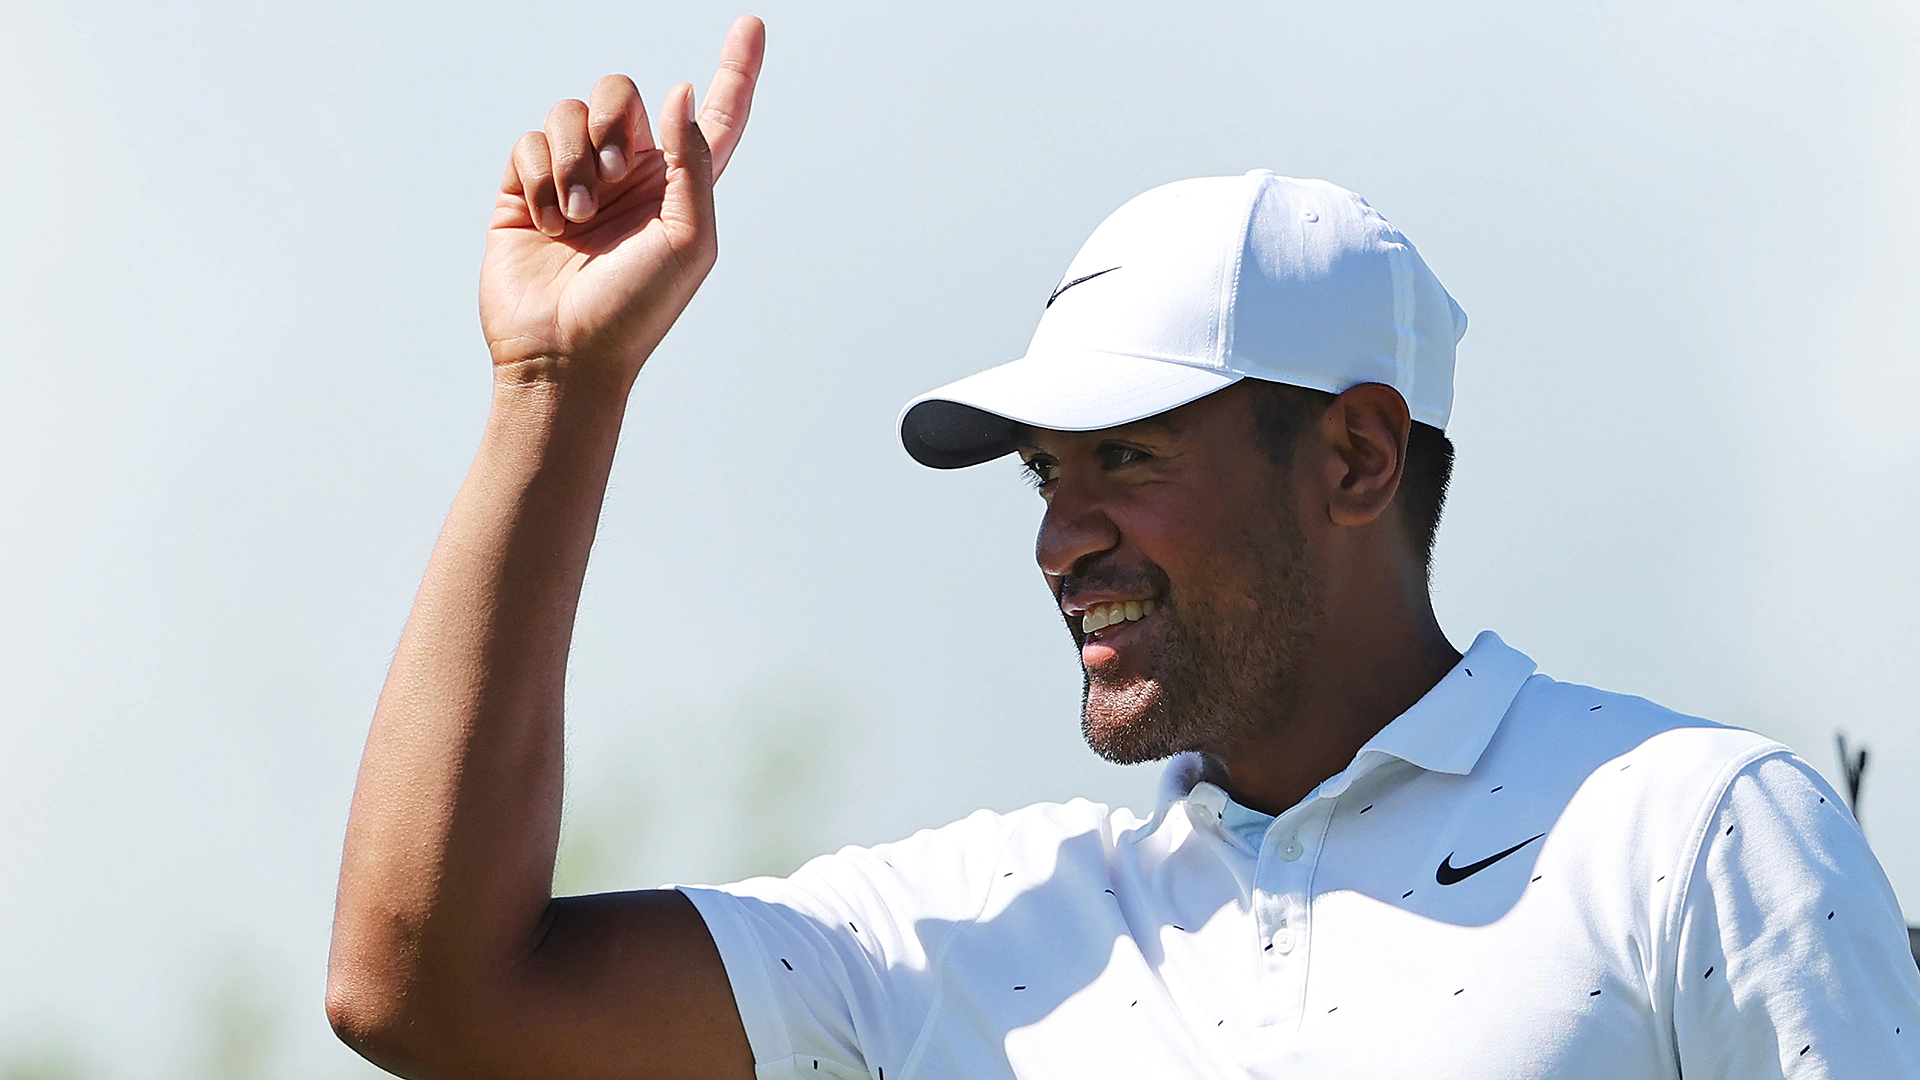 Watch: Tony Finau makes hole-in-one during Round 3 of Mayakoba Golf Classic